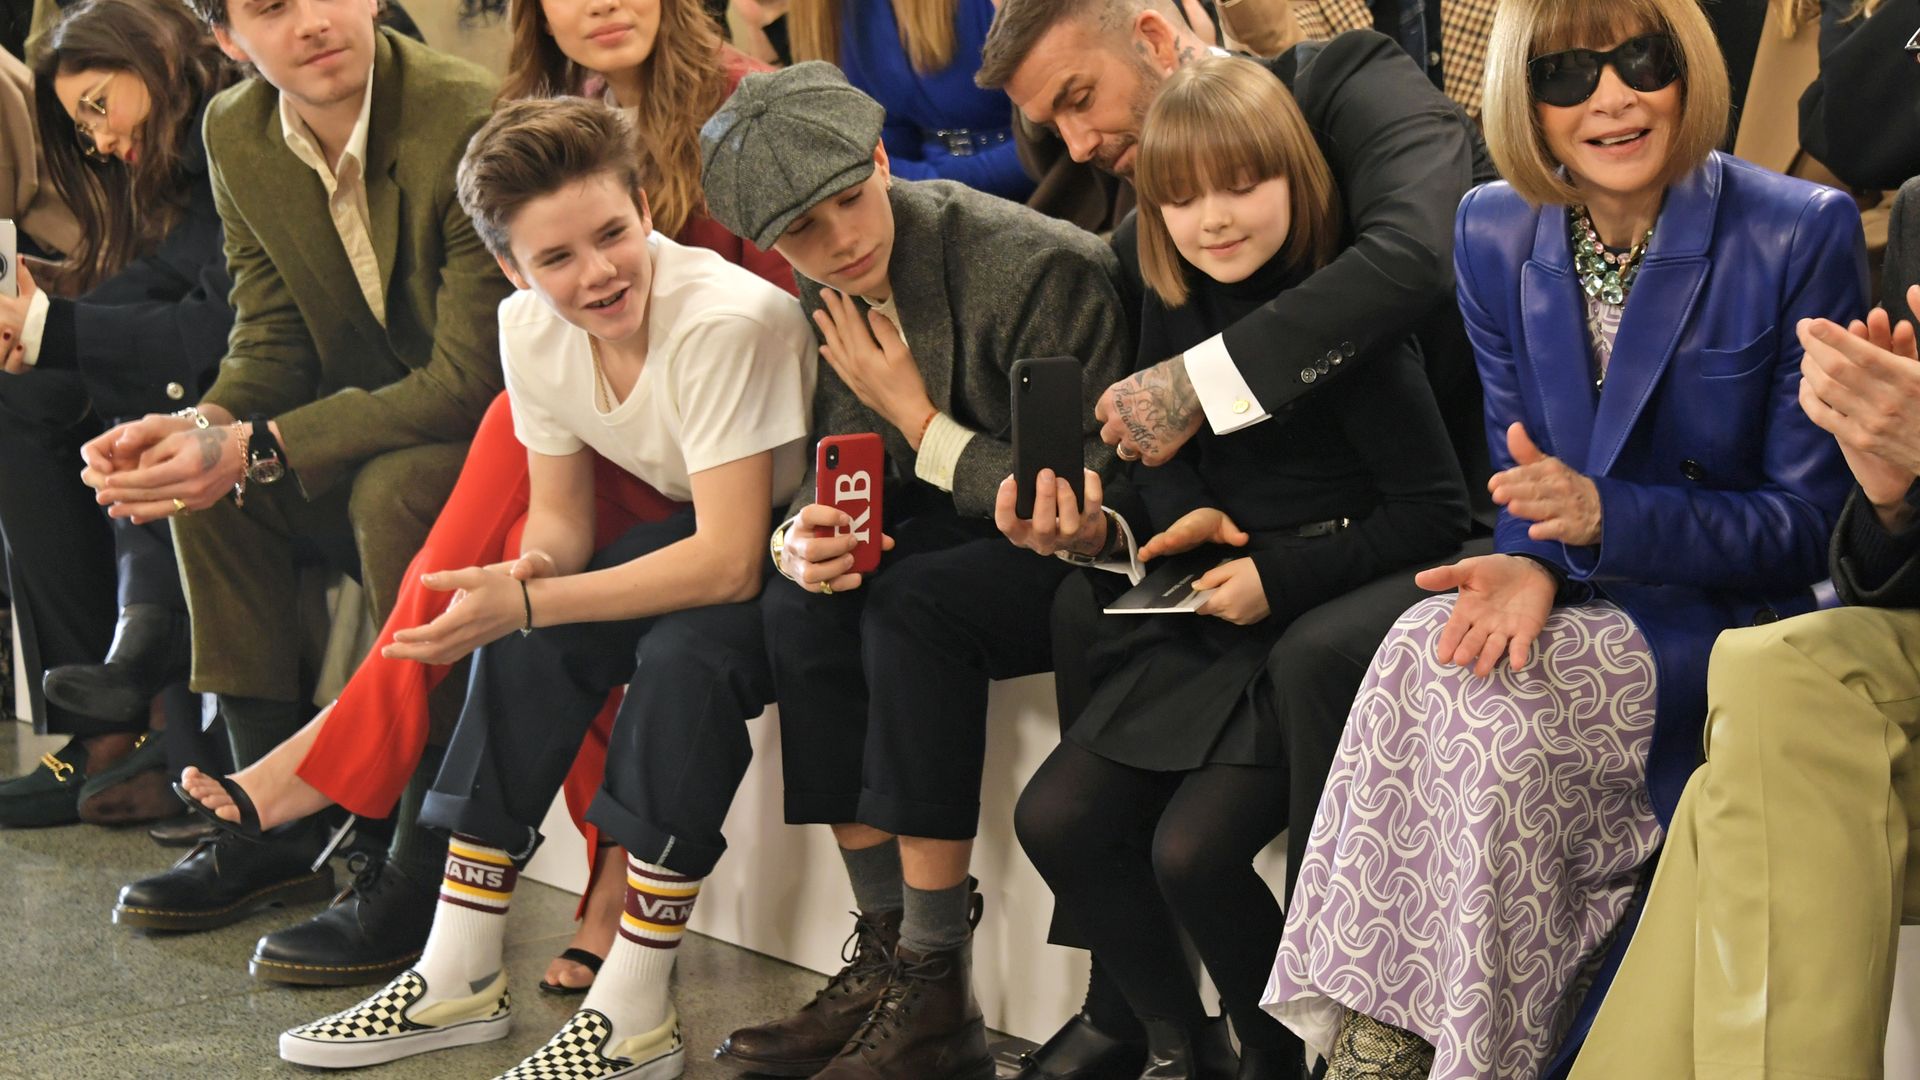 family sat in front row at fashion show